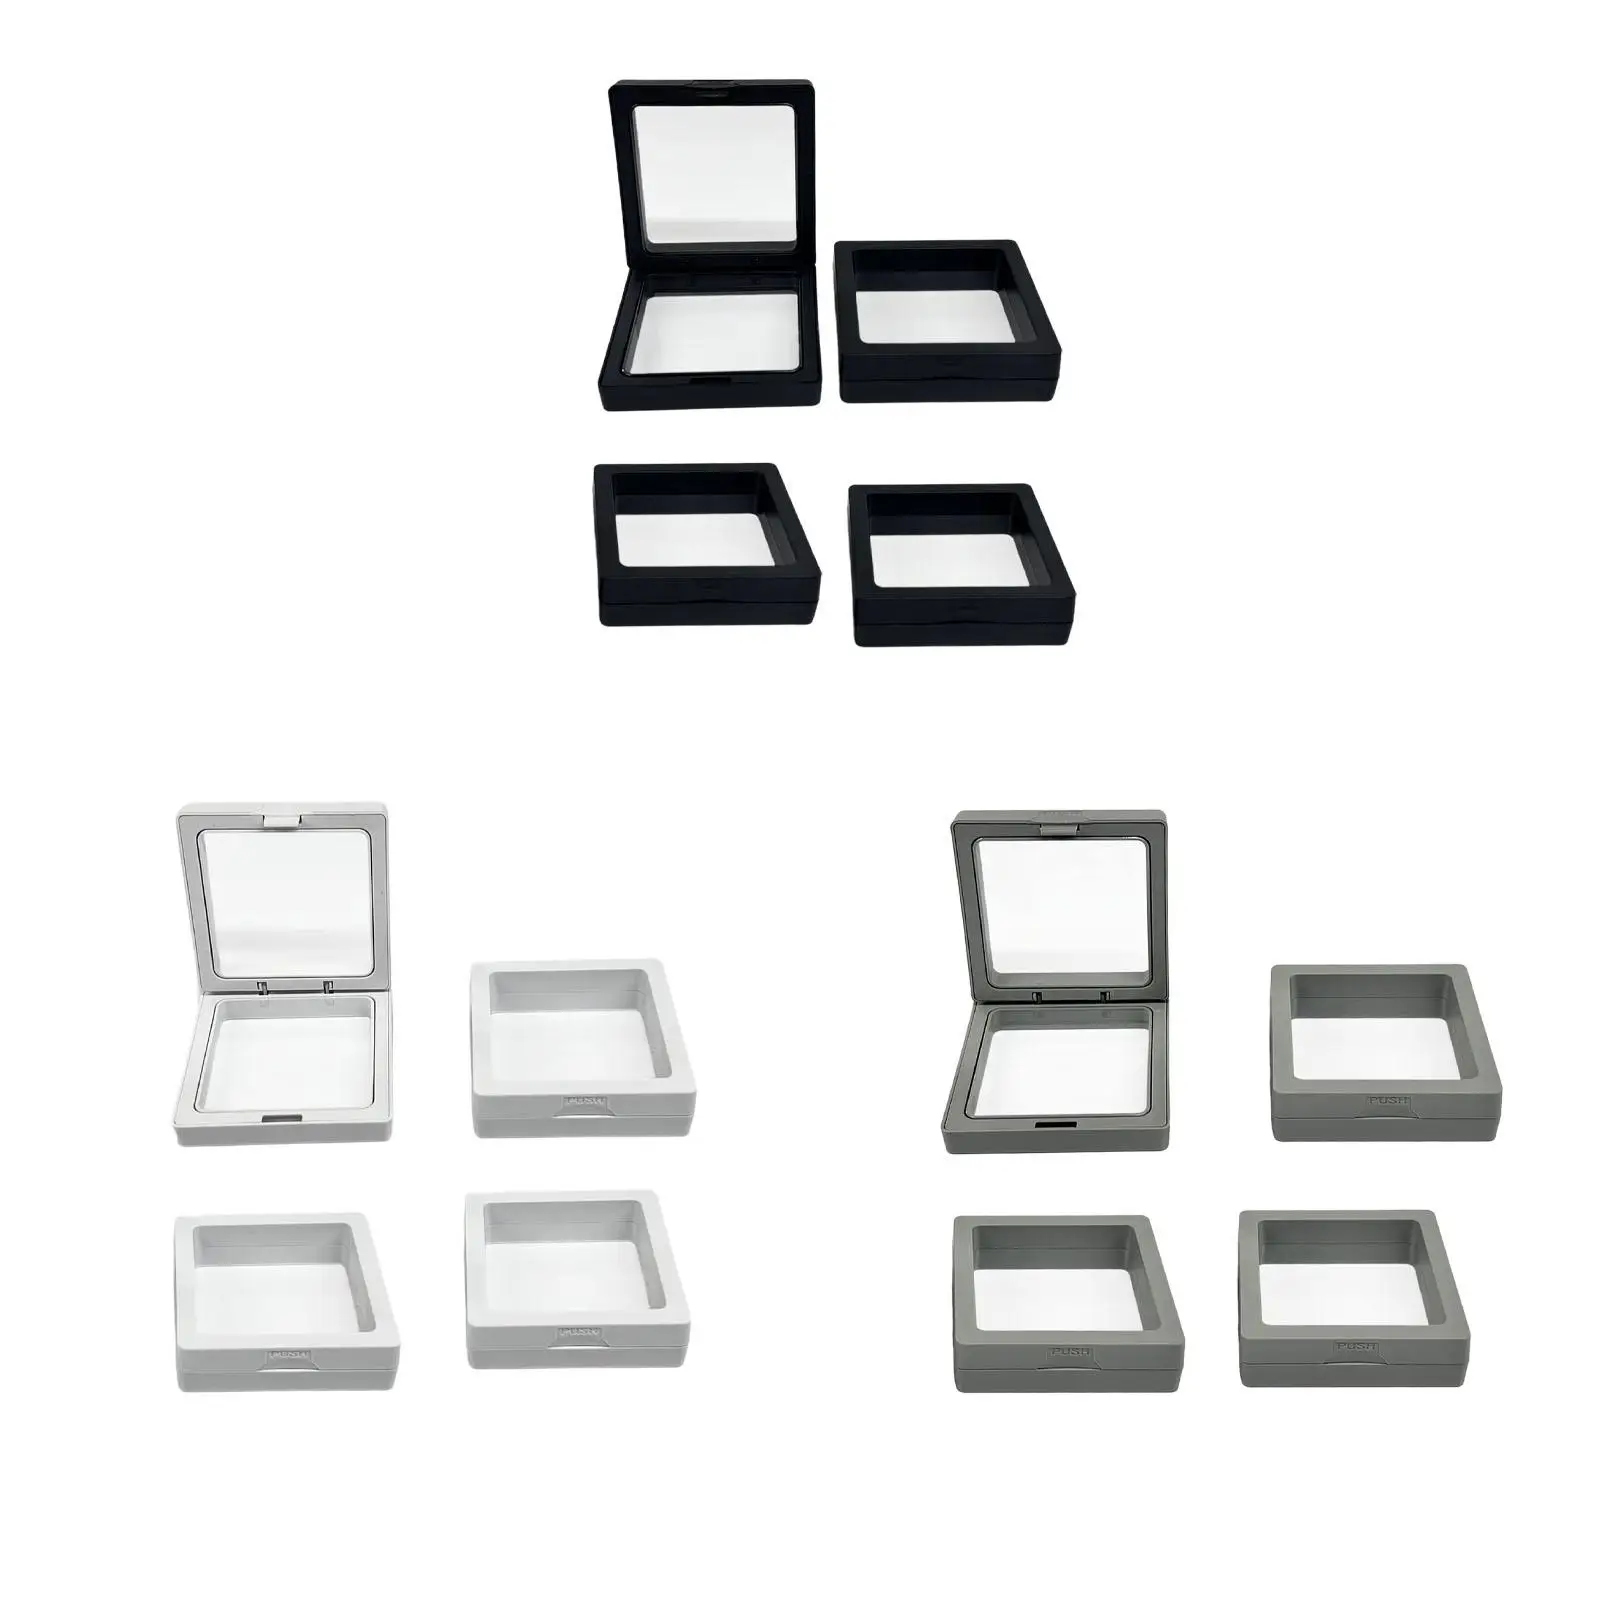 4Pcs 3D Floating Frame Display Case Clear Jewelry Storage Box for Specimens Chip Earrings Rings Bracelet Necklace Brooch Medal